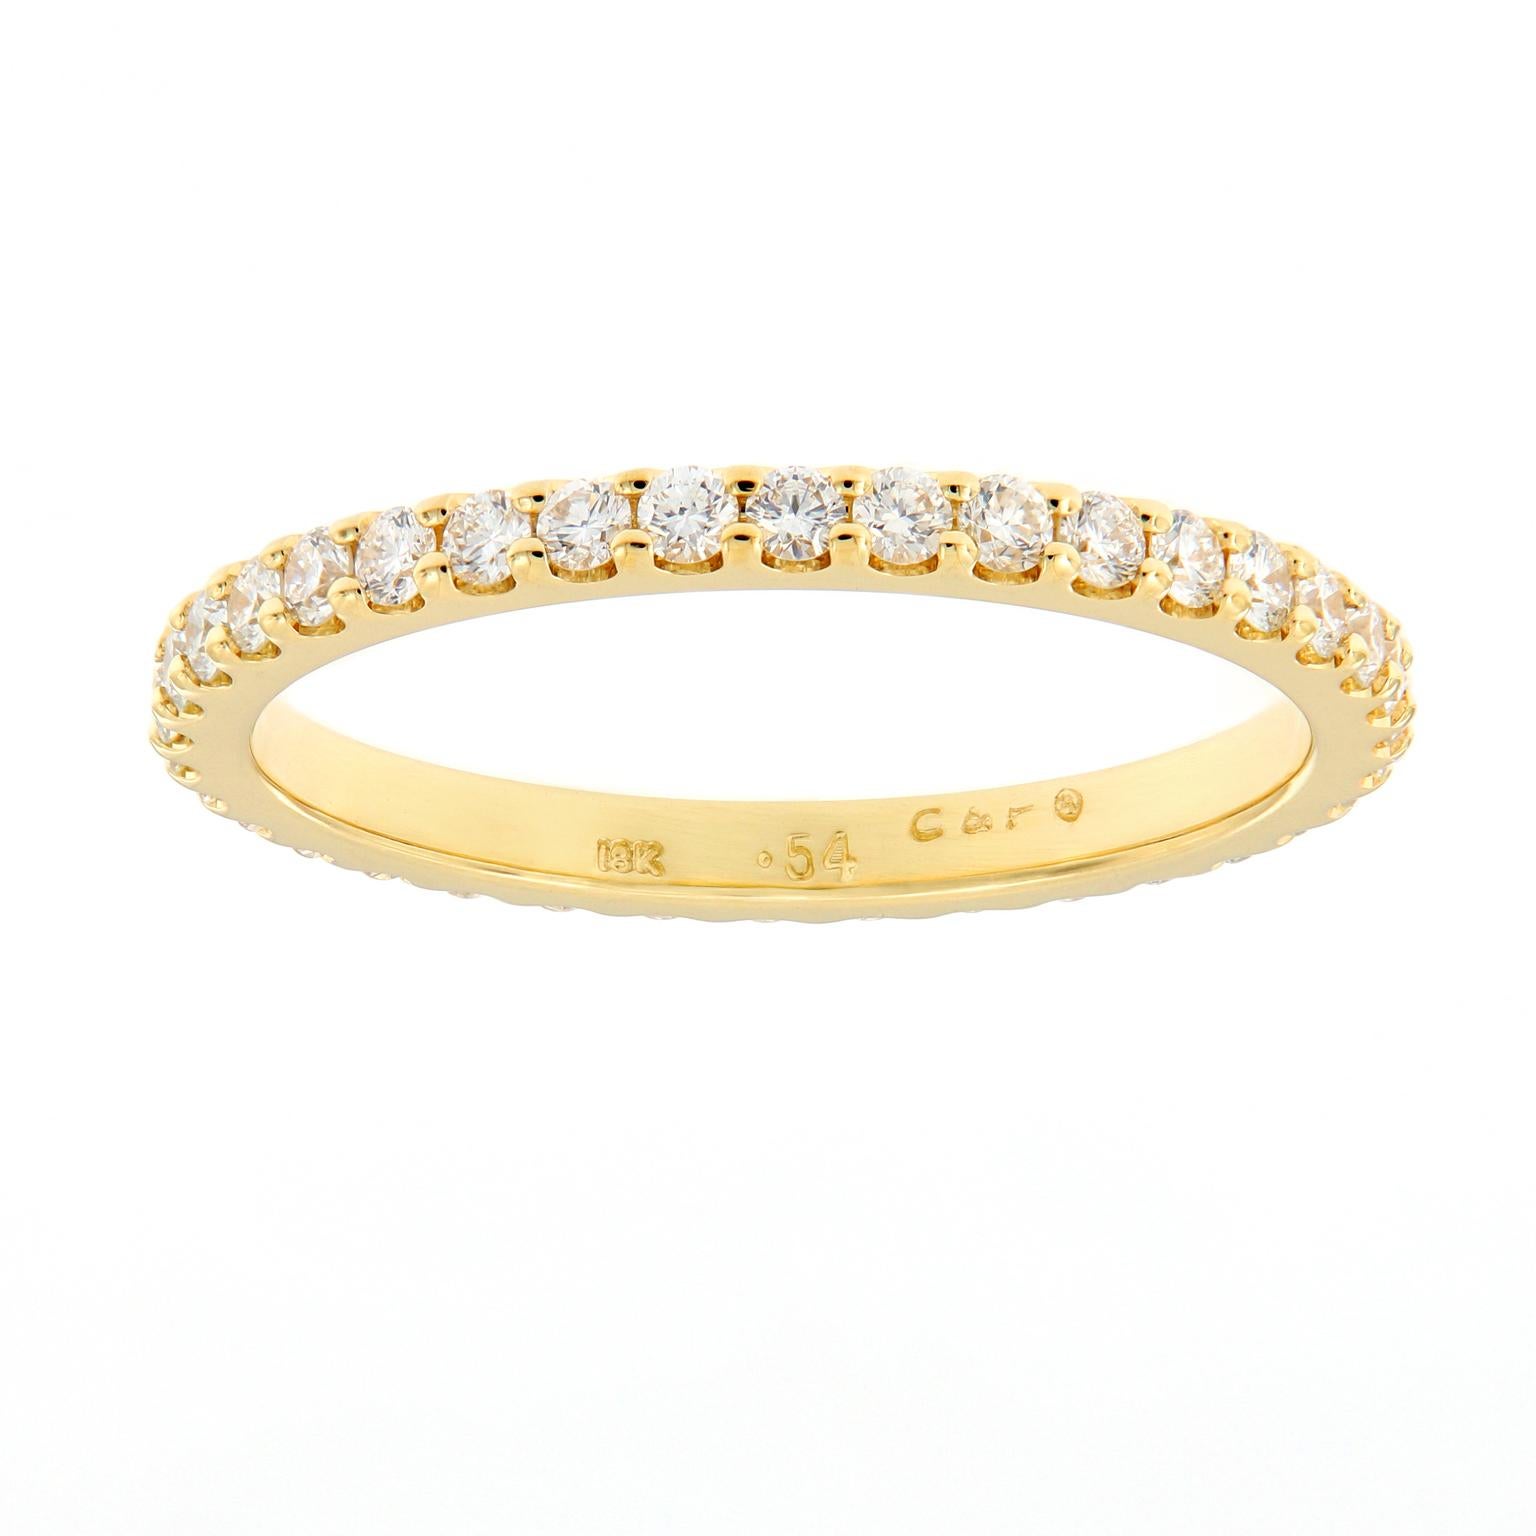 You cannot go wrong with this eternally classic ring crafted in 18k yellow gold with 34 round brilliant cut diamonds = 0.54 Cttw. Ring is great for wearing alone, stacking and would also beautifully complement an engagement ring. Size 6 but can be